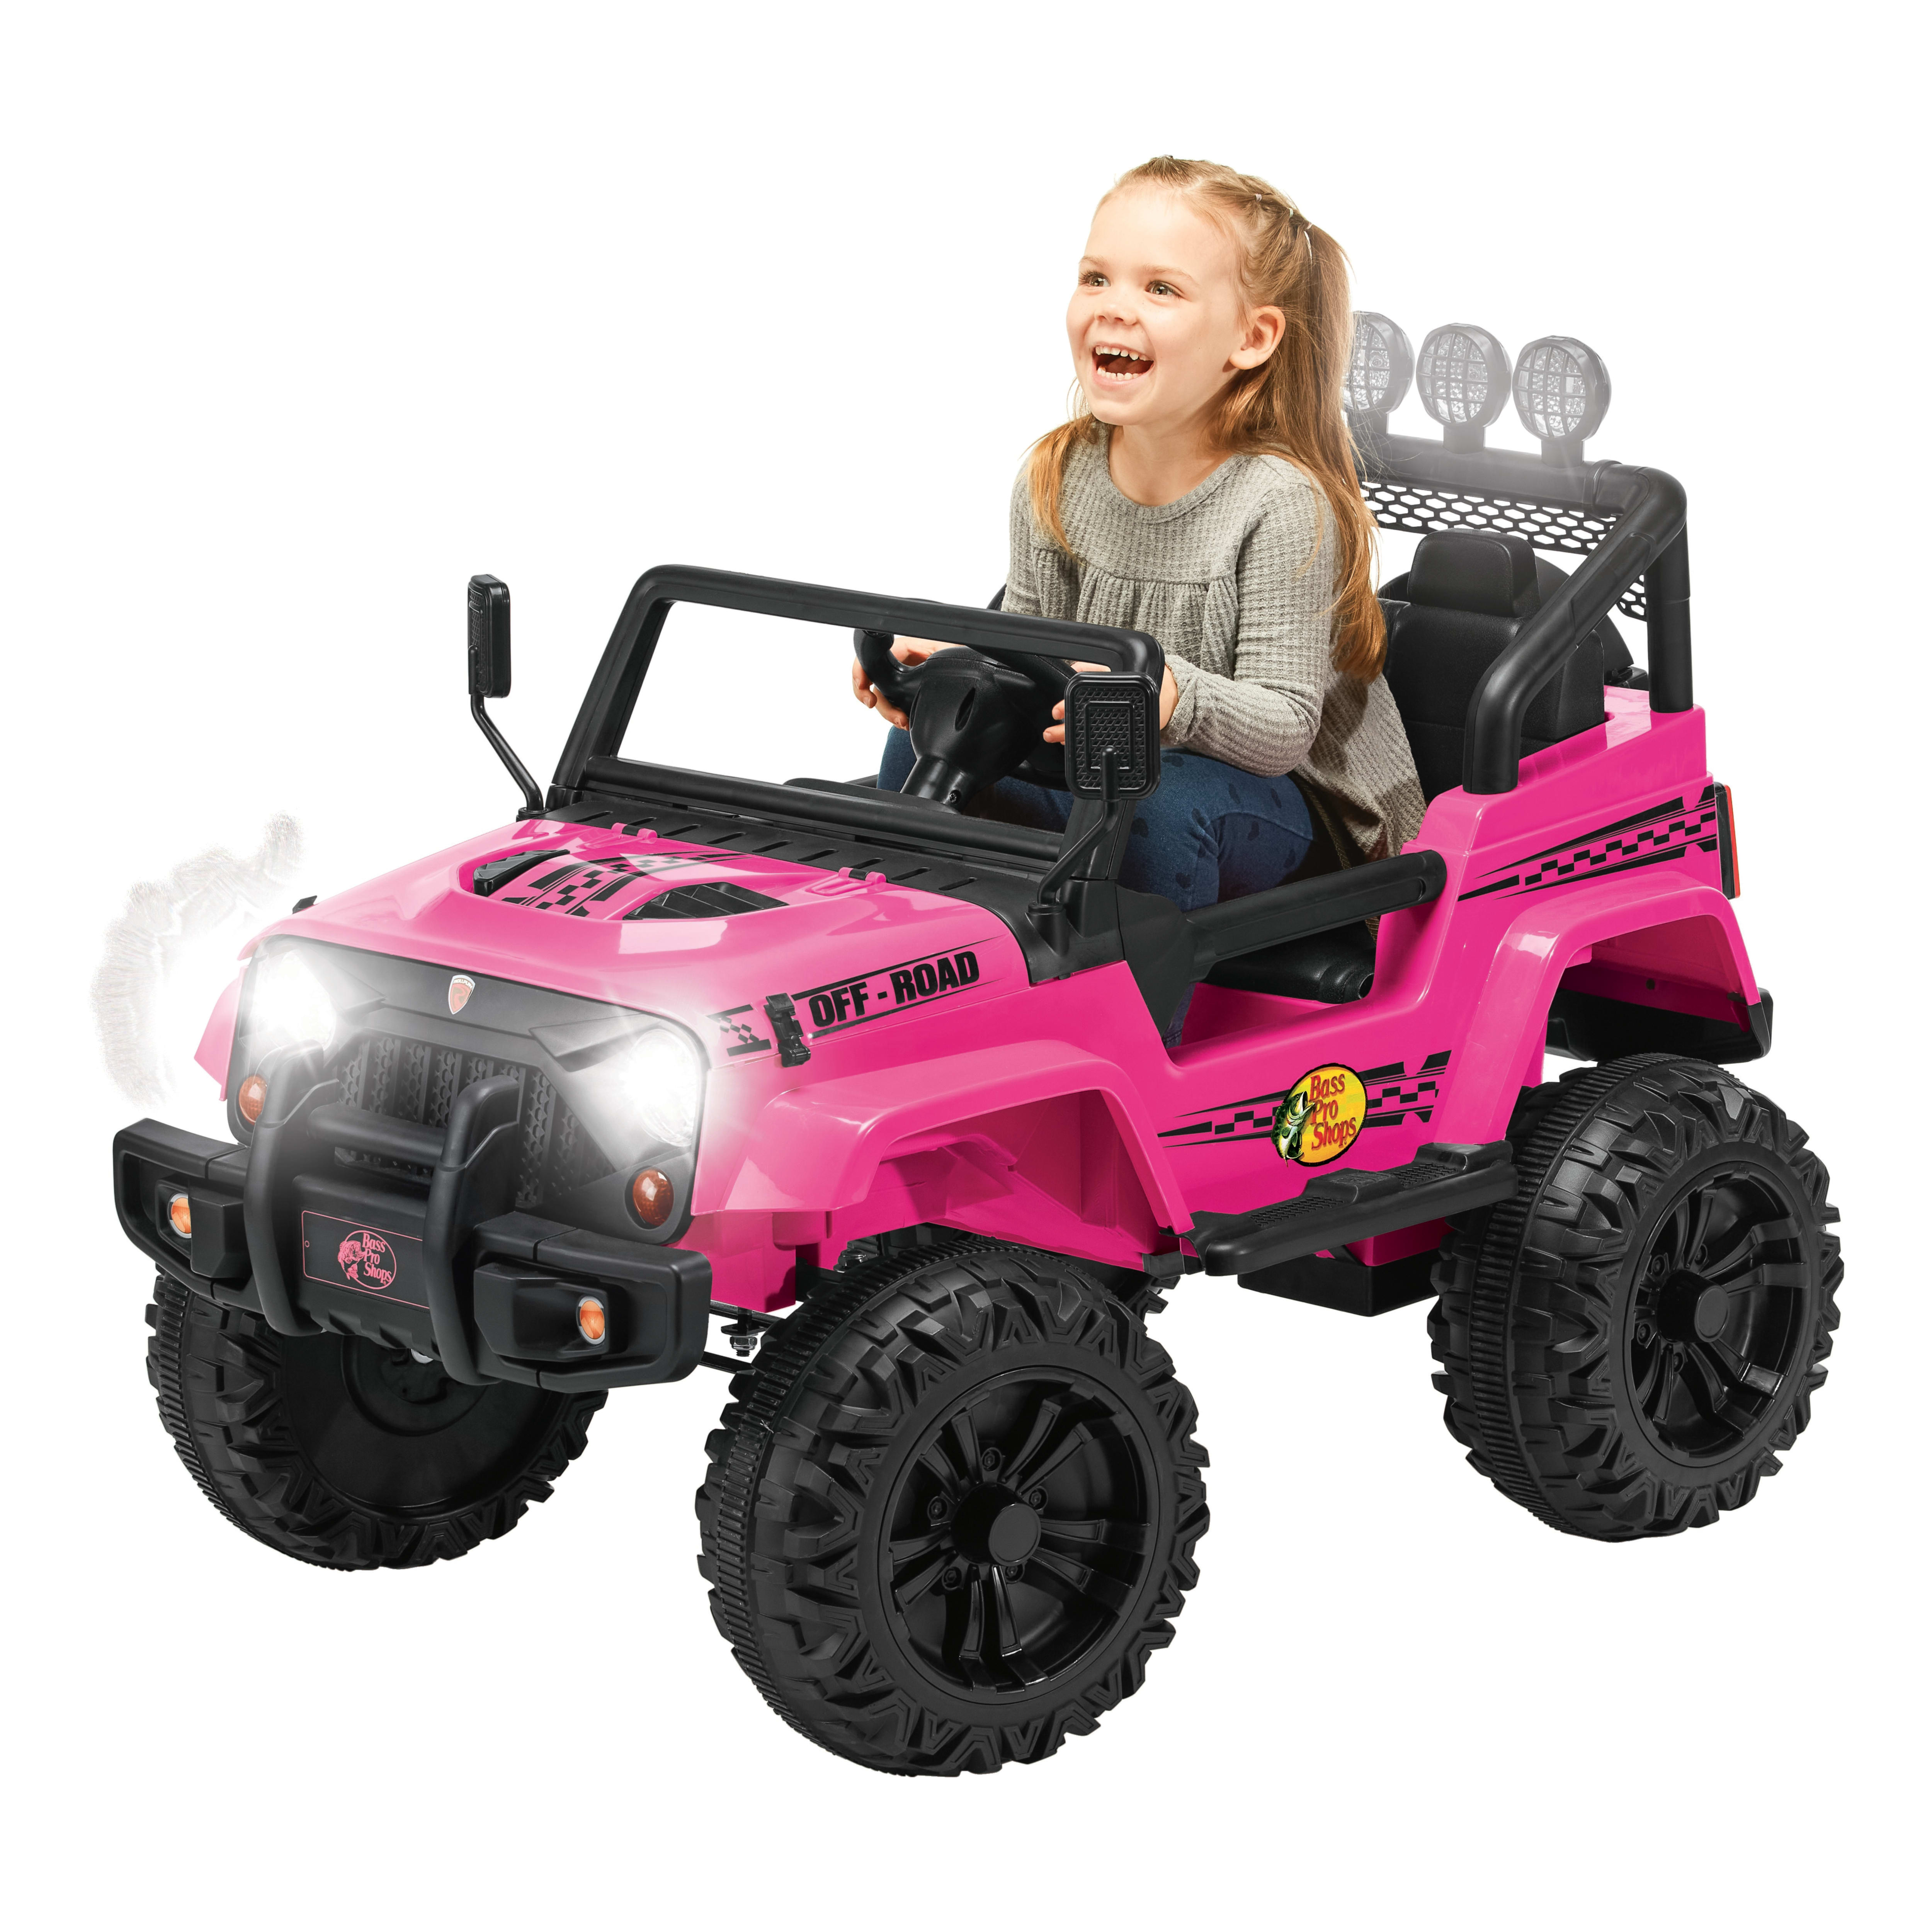 Bass Pro Shops® Powersport Trail Thunder 12V Battery-Powered Ride-On Truck - Pink